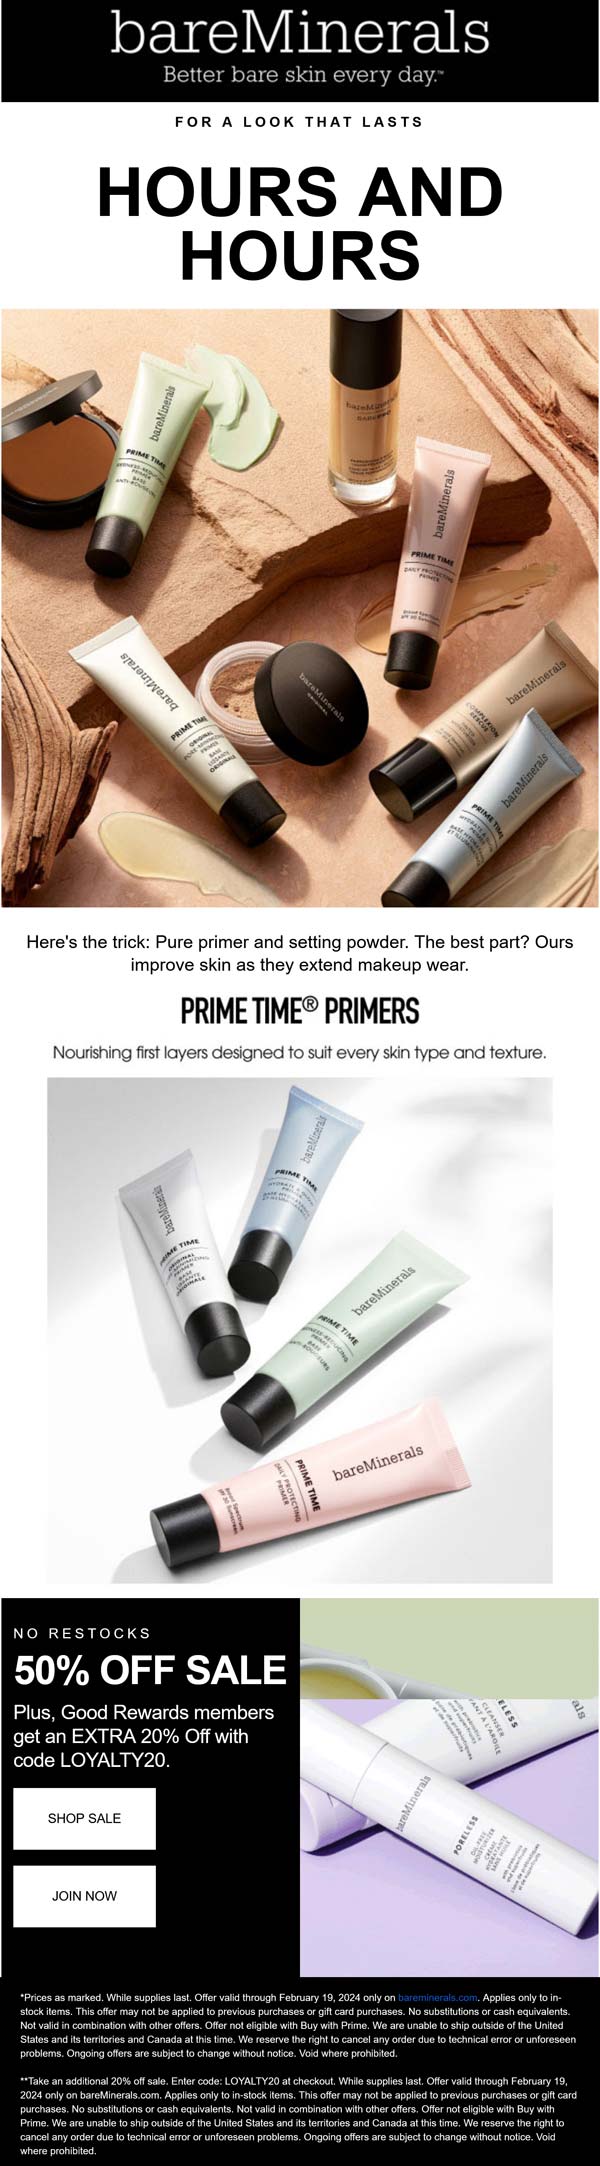 bareMinerals stores Coupon  50-70% off sale items at bareMinerals via promo code LOYALTY20 #bareminerals 